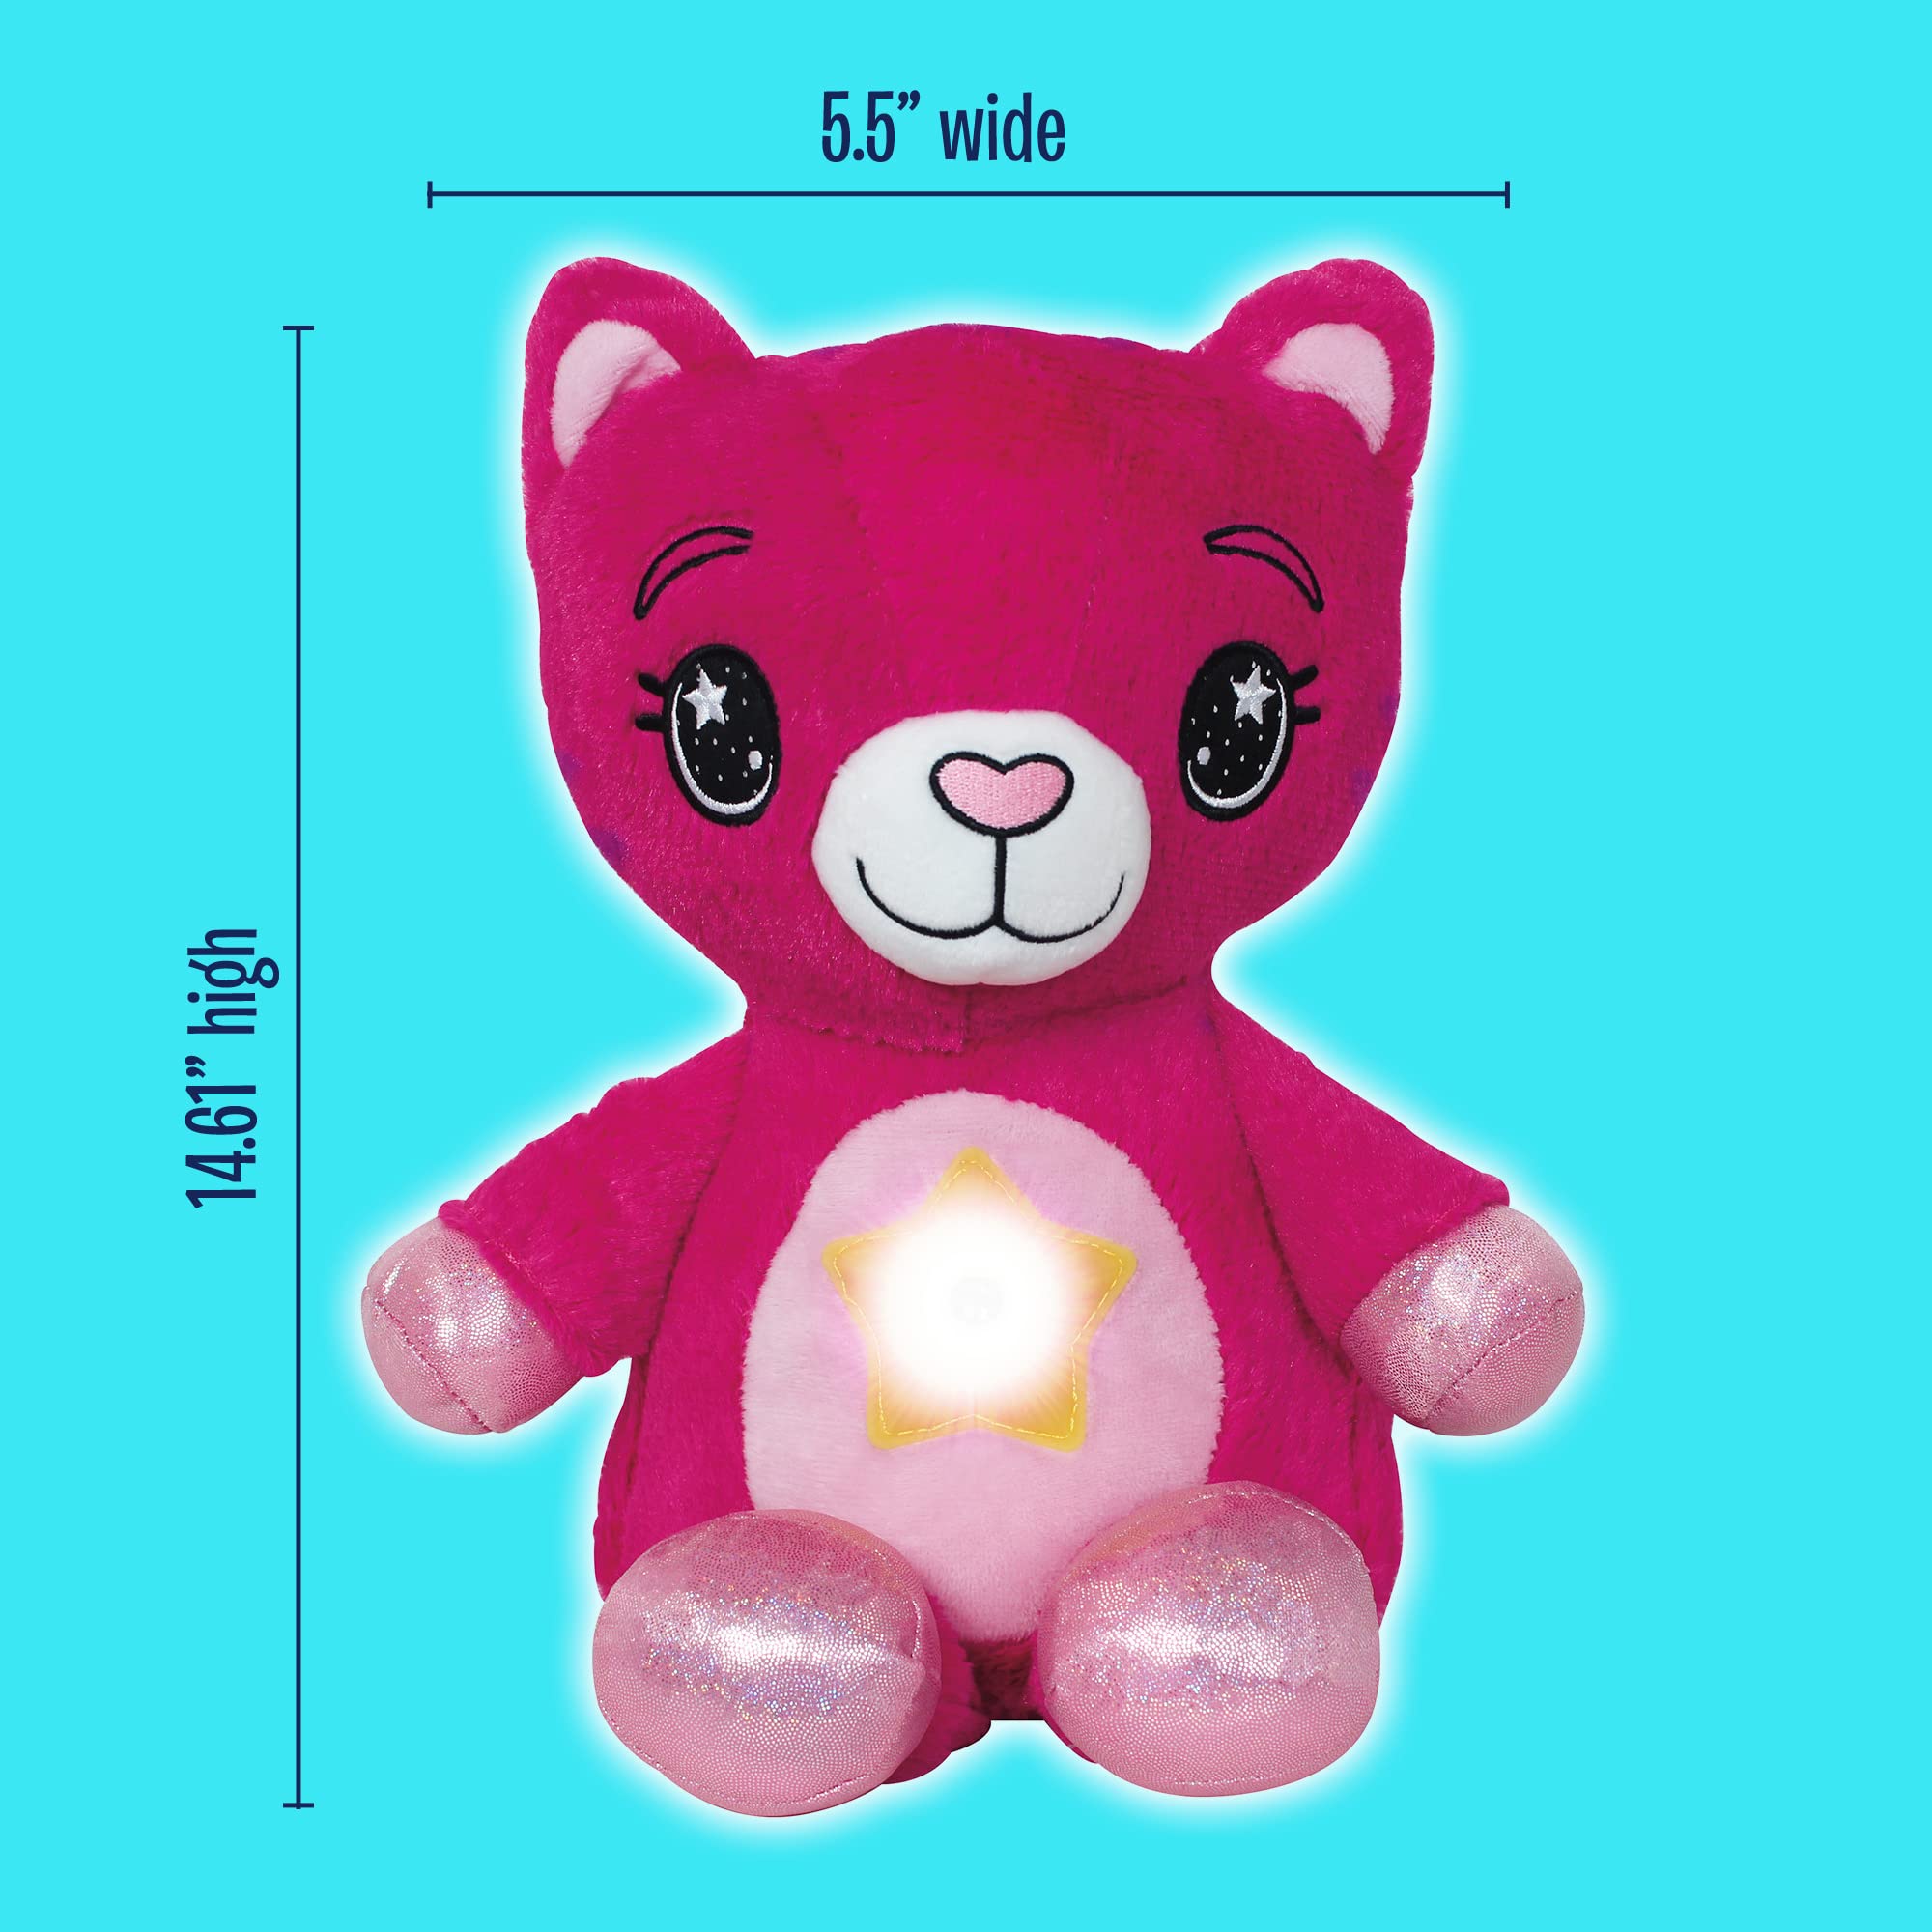 Ontel Star Belly Dream Lites, Stuffed Animal Night Light, 3 years and up, Pretty Pink Kitty - Projects Glowing Stars & Shapes in 6 Gentle Colors, As Seen on TV